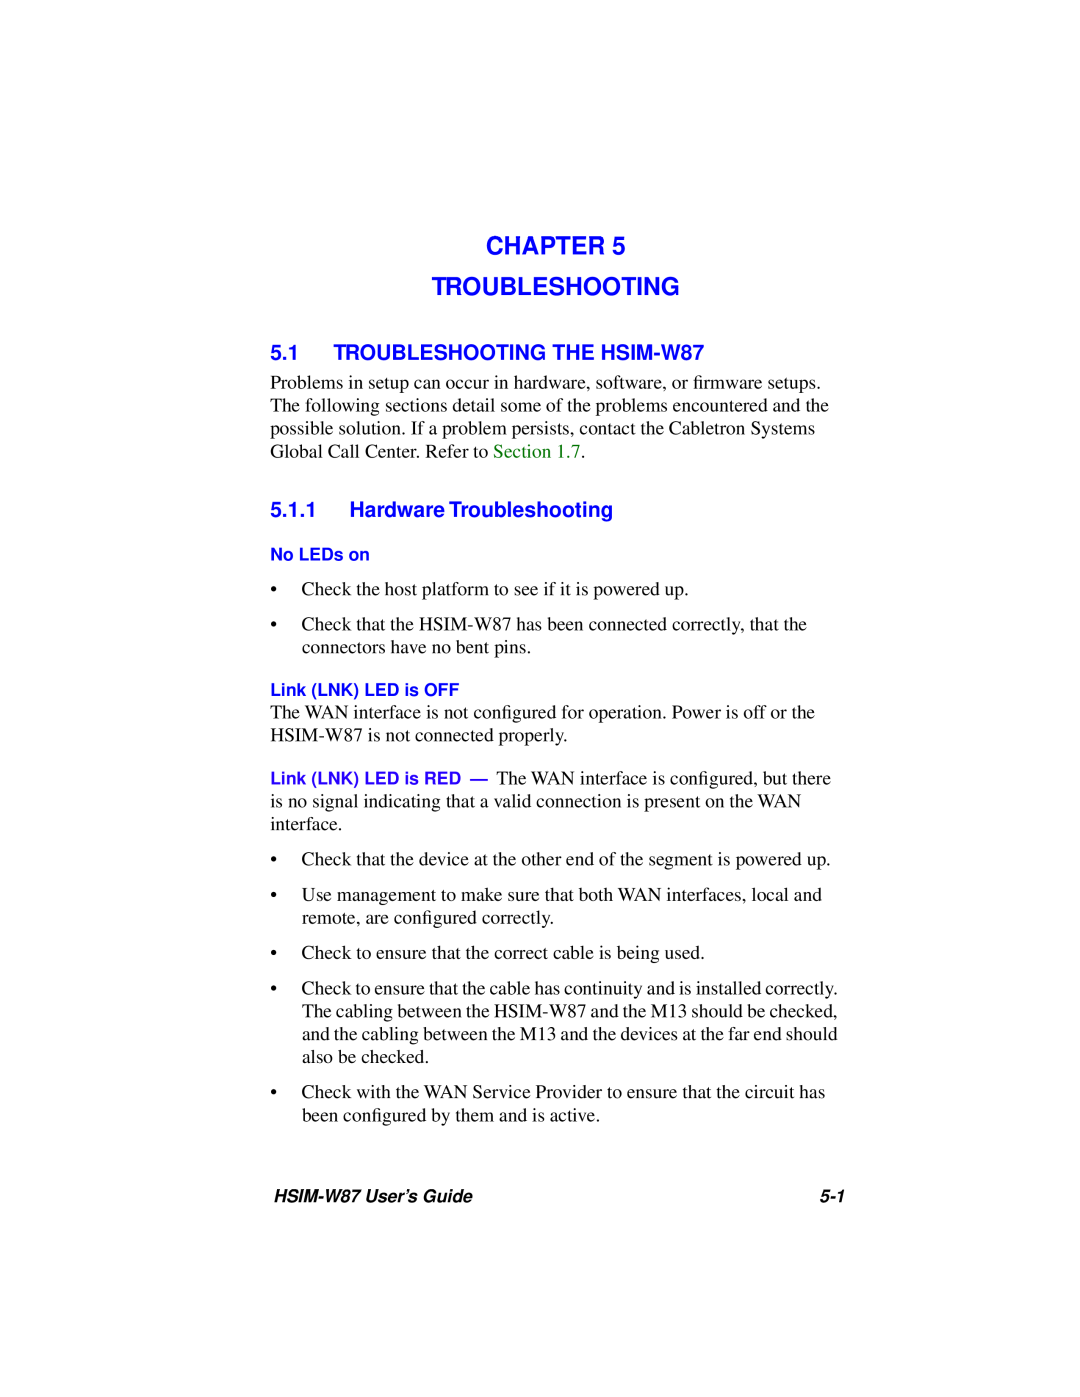 Cabletron Systems manual Chapter Troubleshooting, TROUBLESHOOTING THE HSIM-W87, Hardware Troubleshooting 